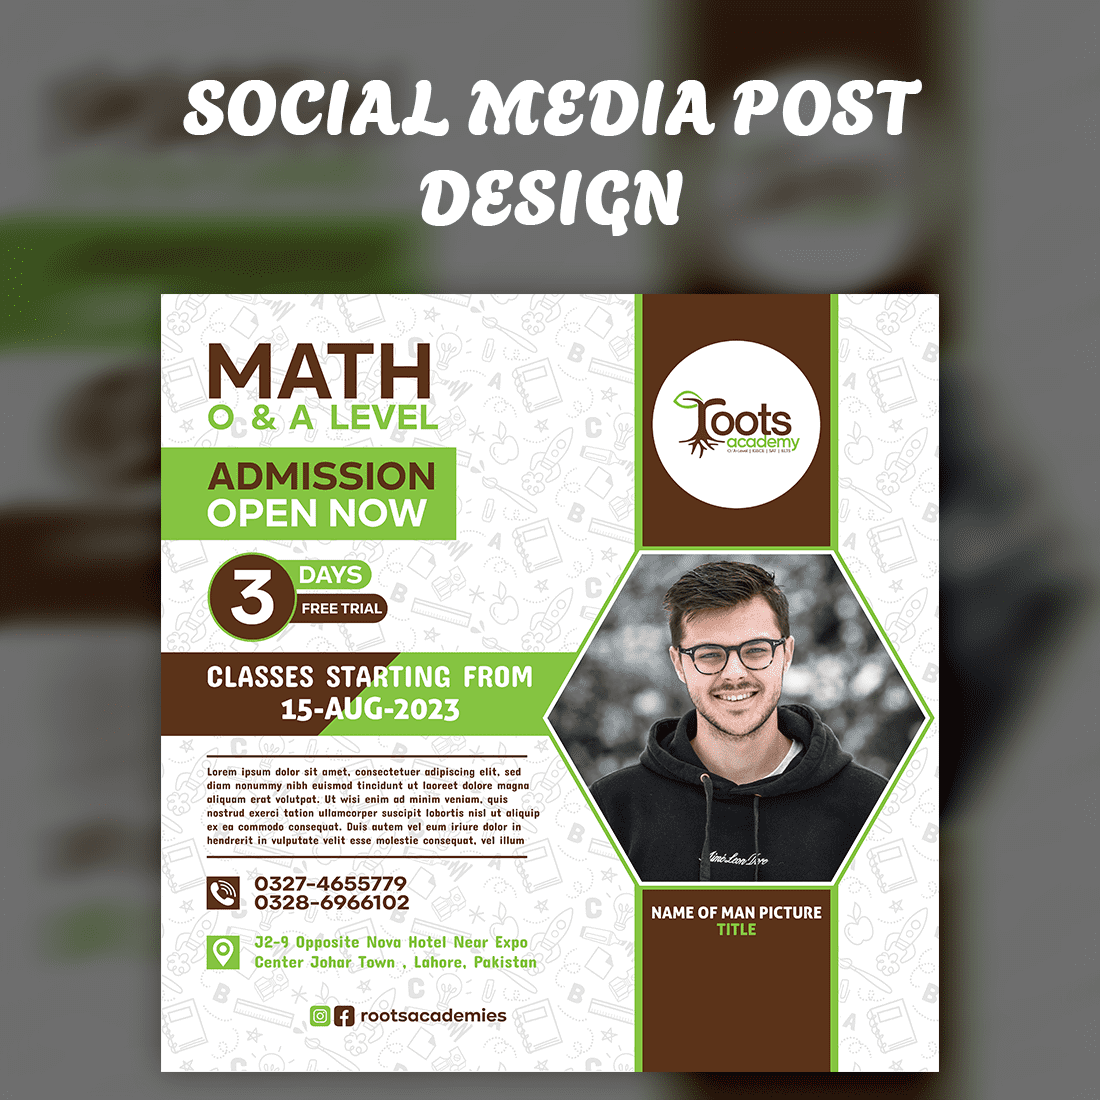 Professional Admission Social Media Post Template Design cover image.